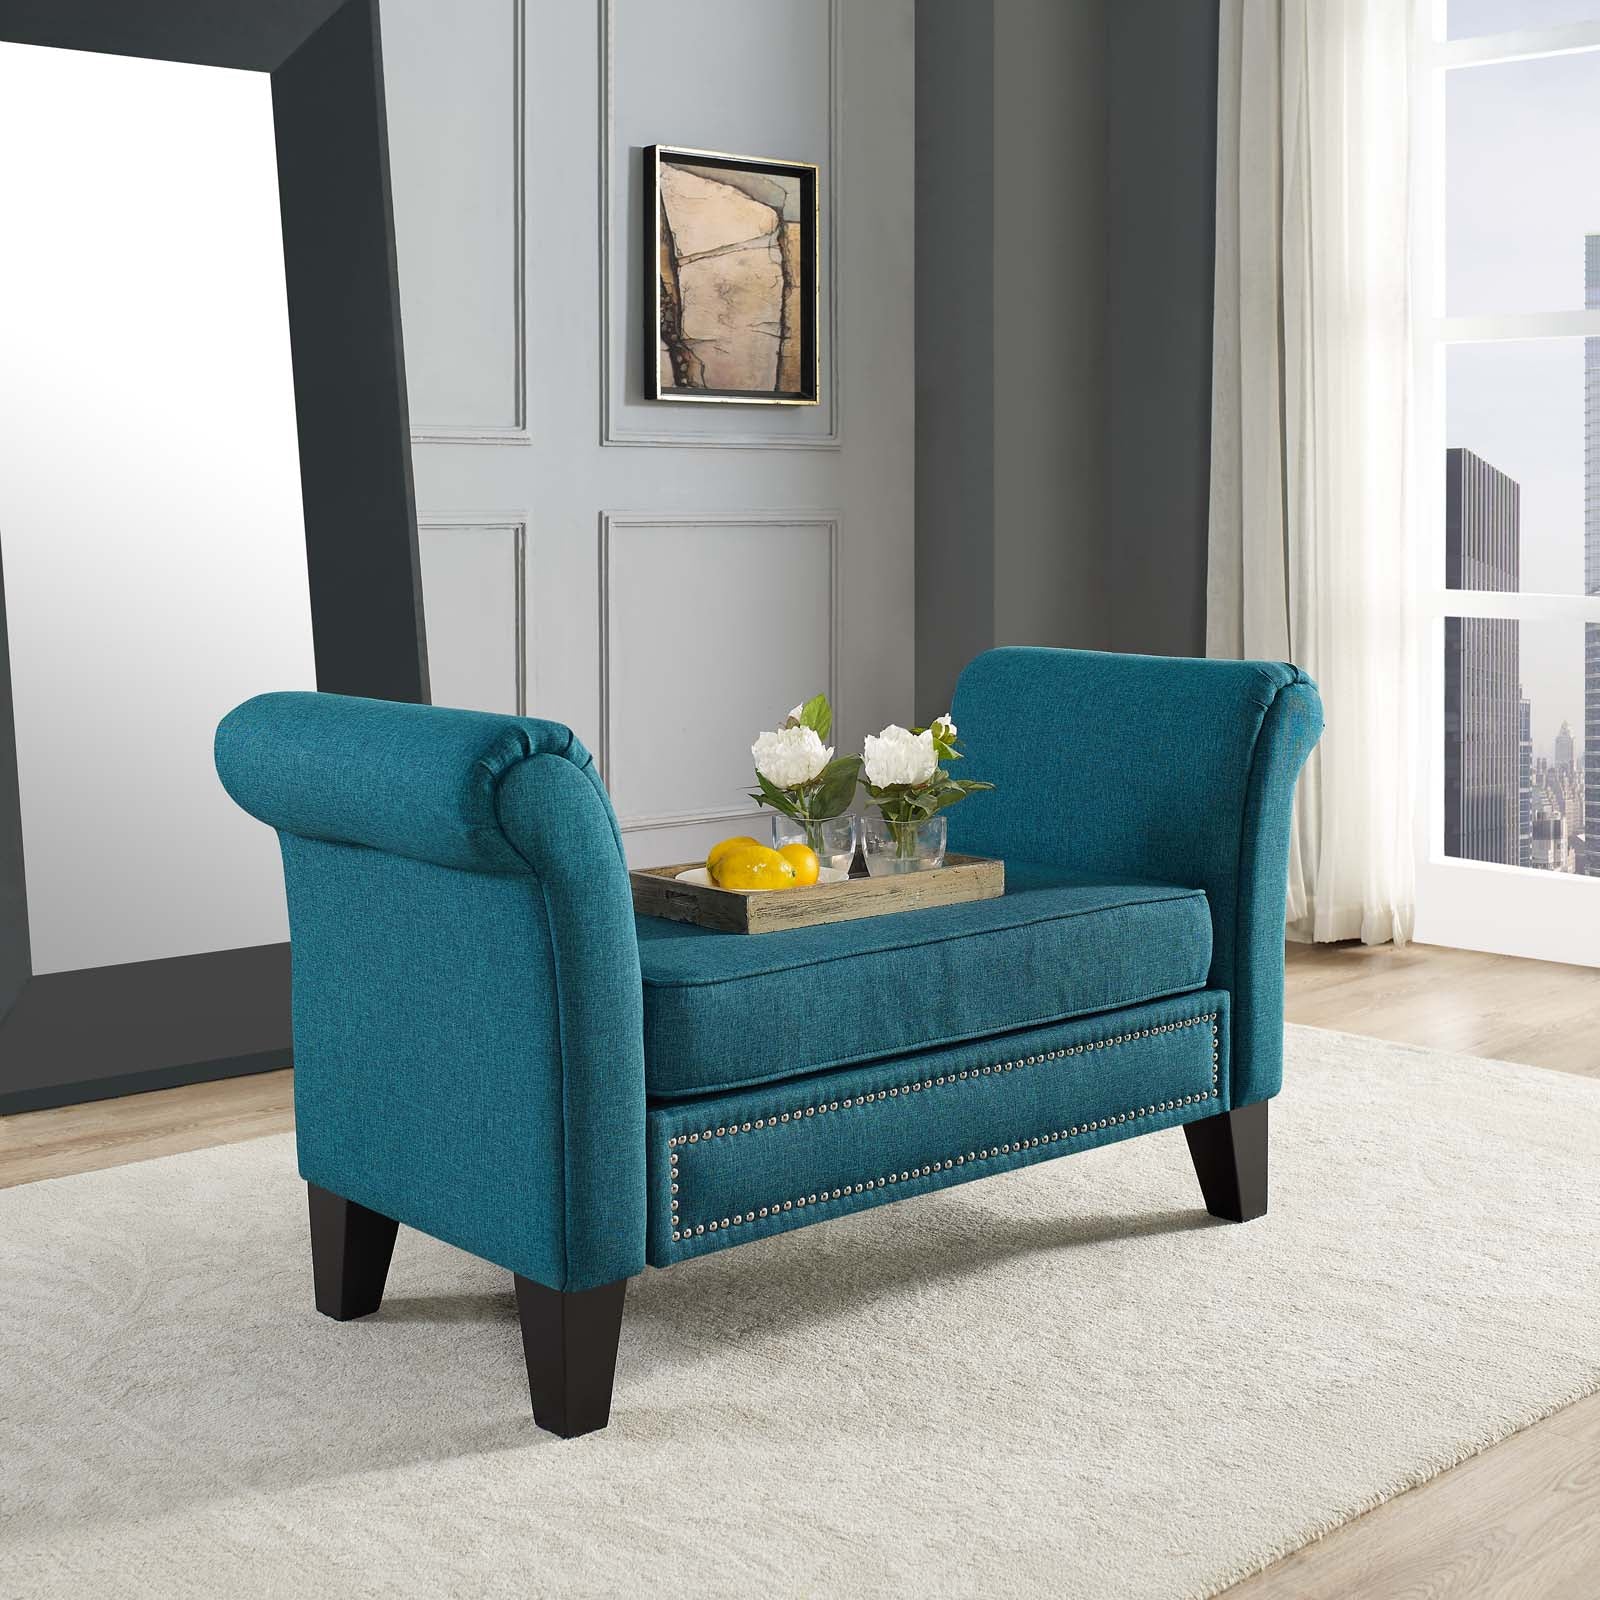 Modway Benches - Rendezvous Bench Teal